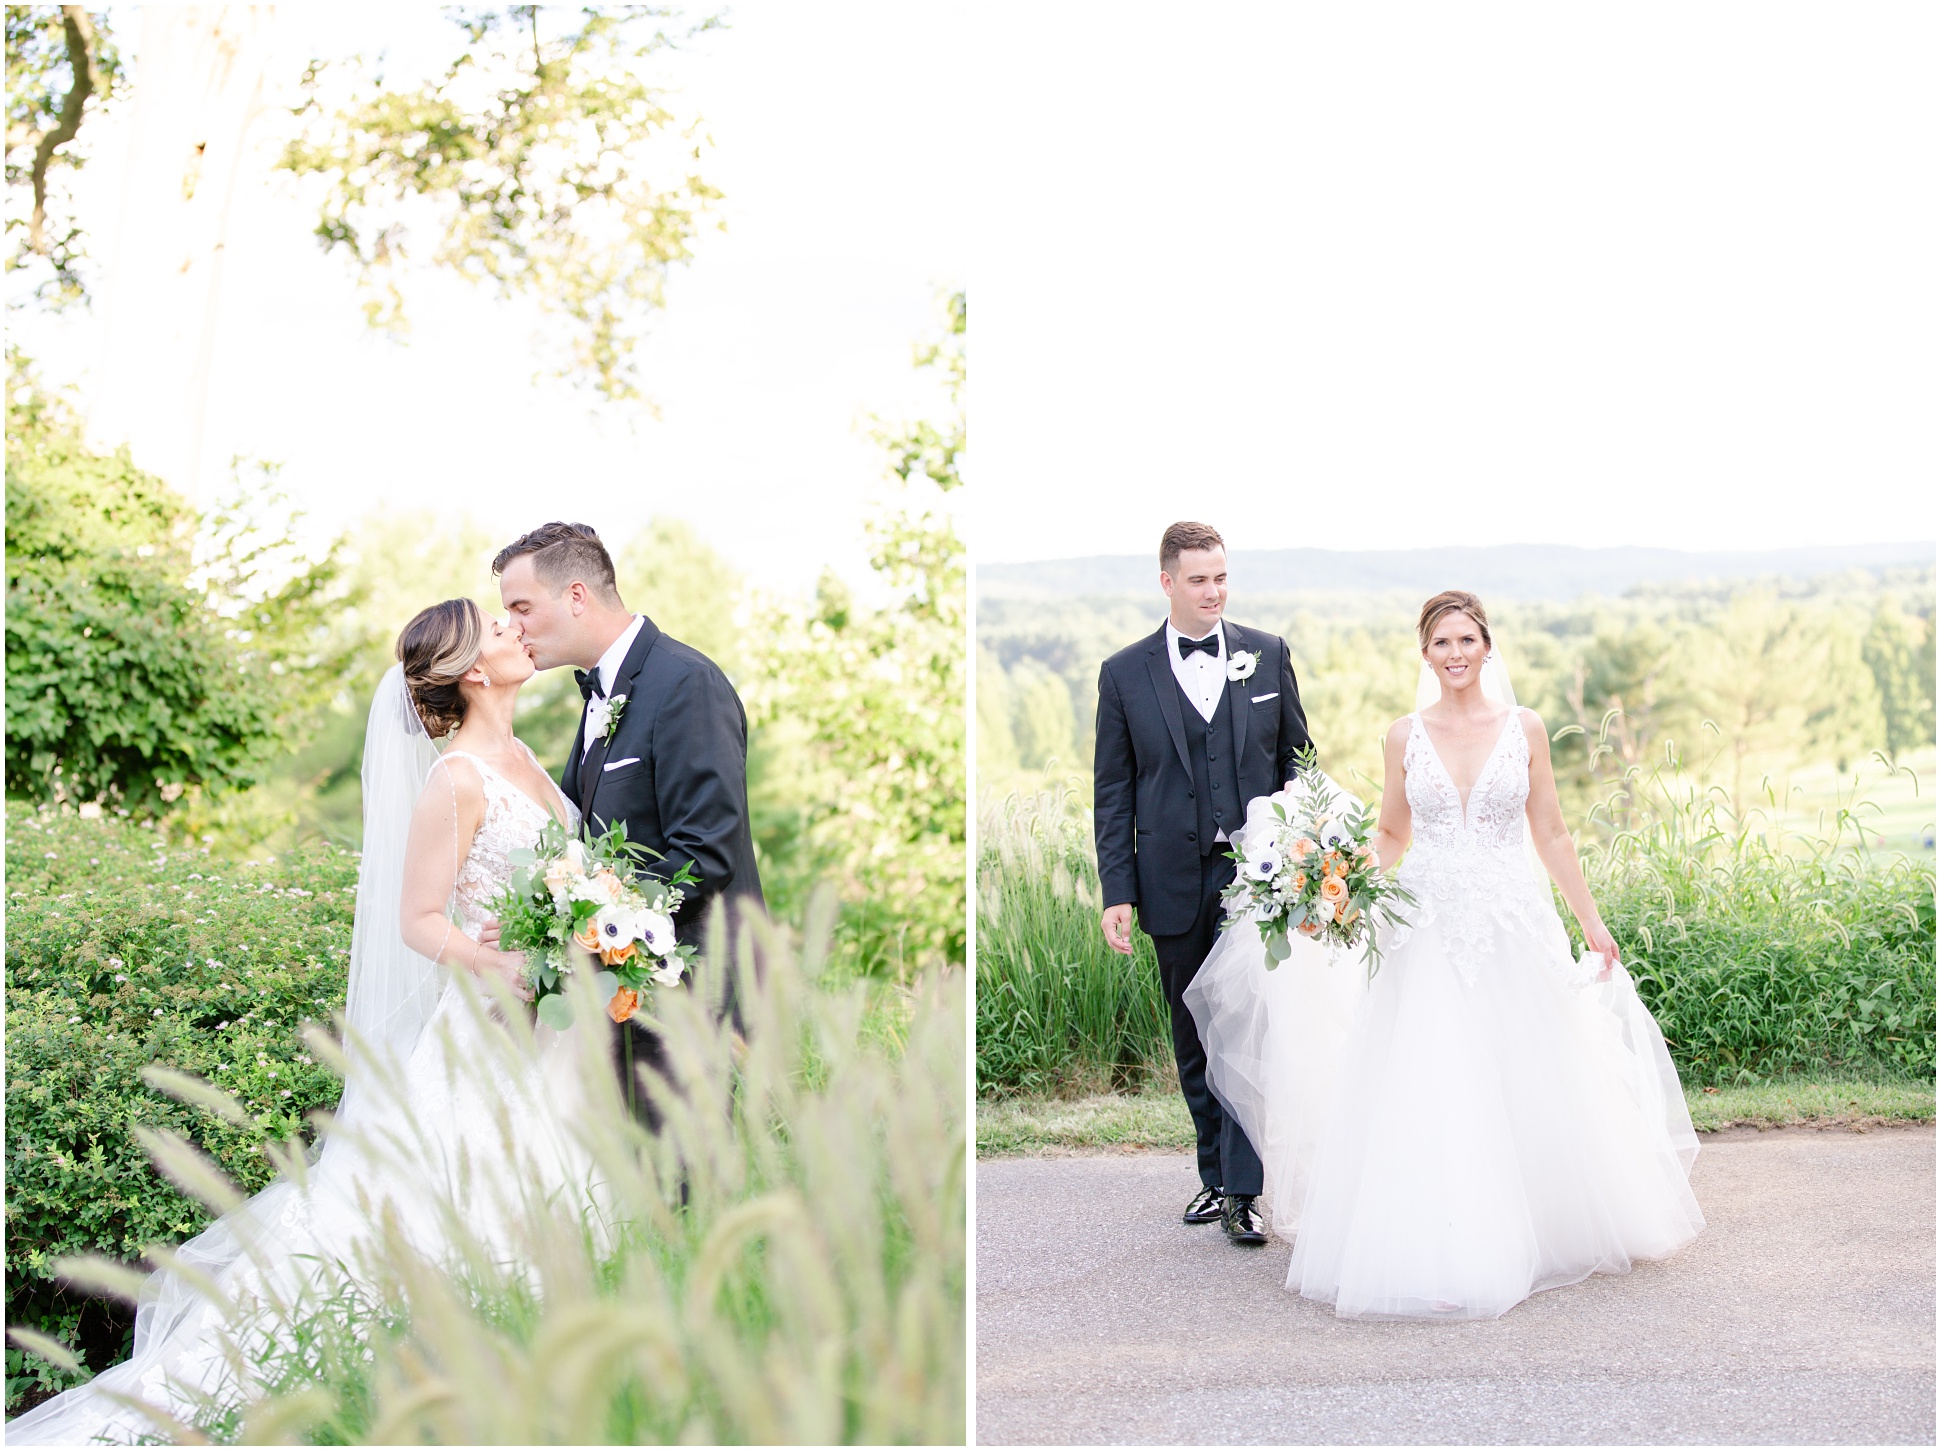 Two images of bride and groom at the golf course